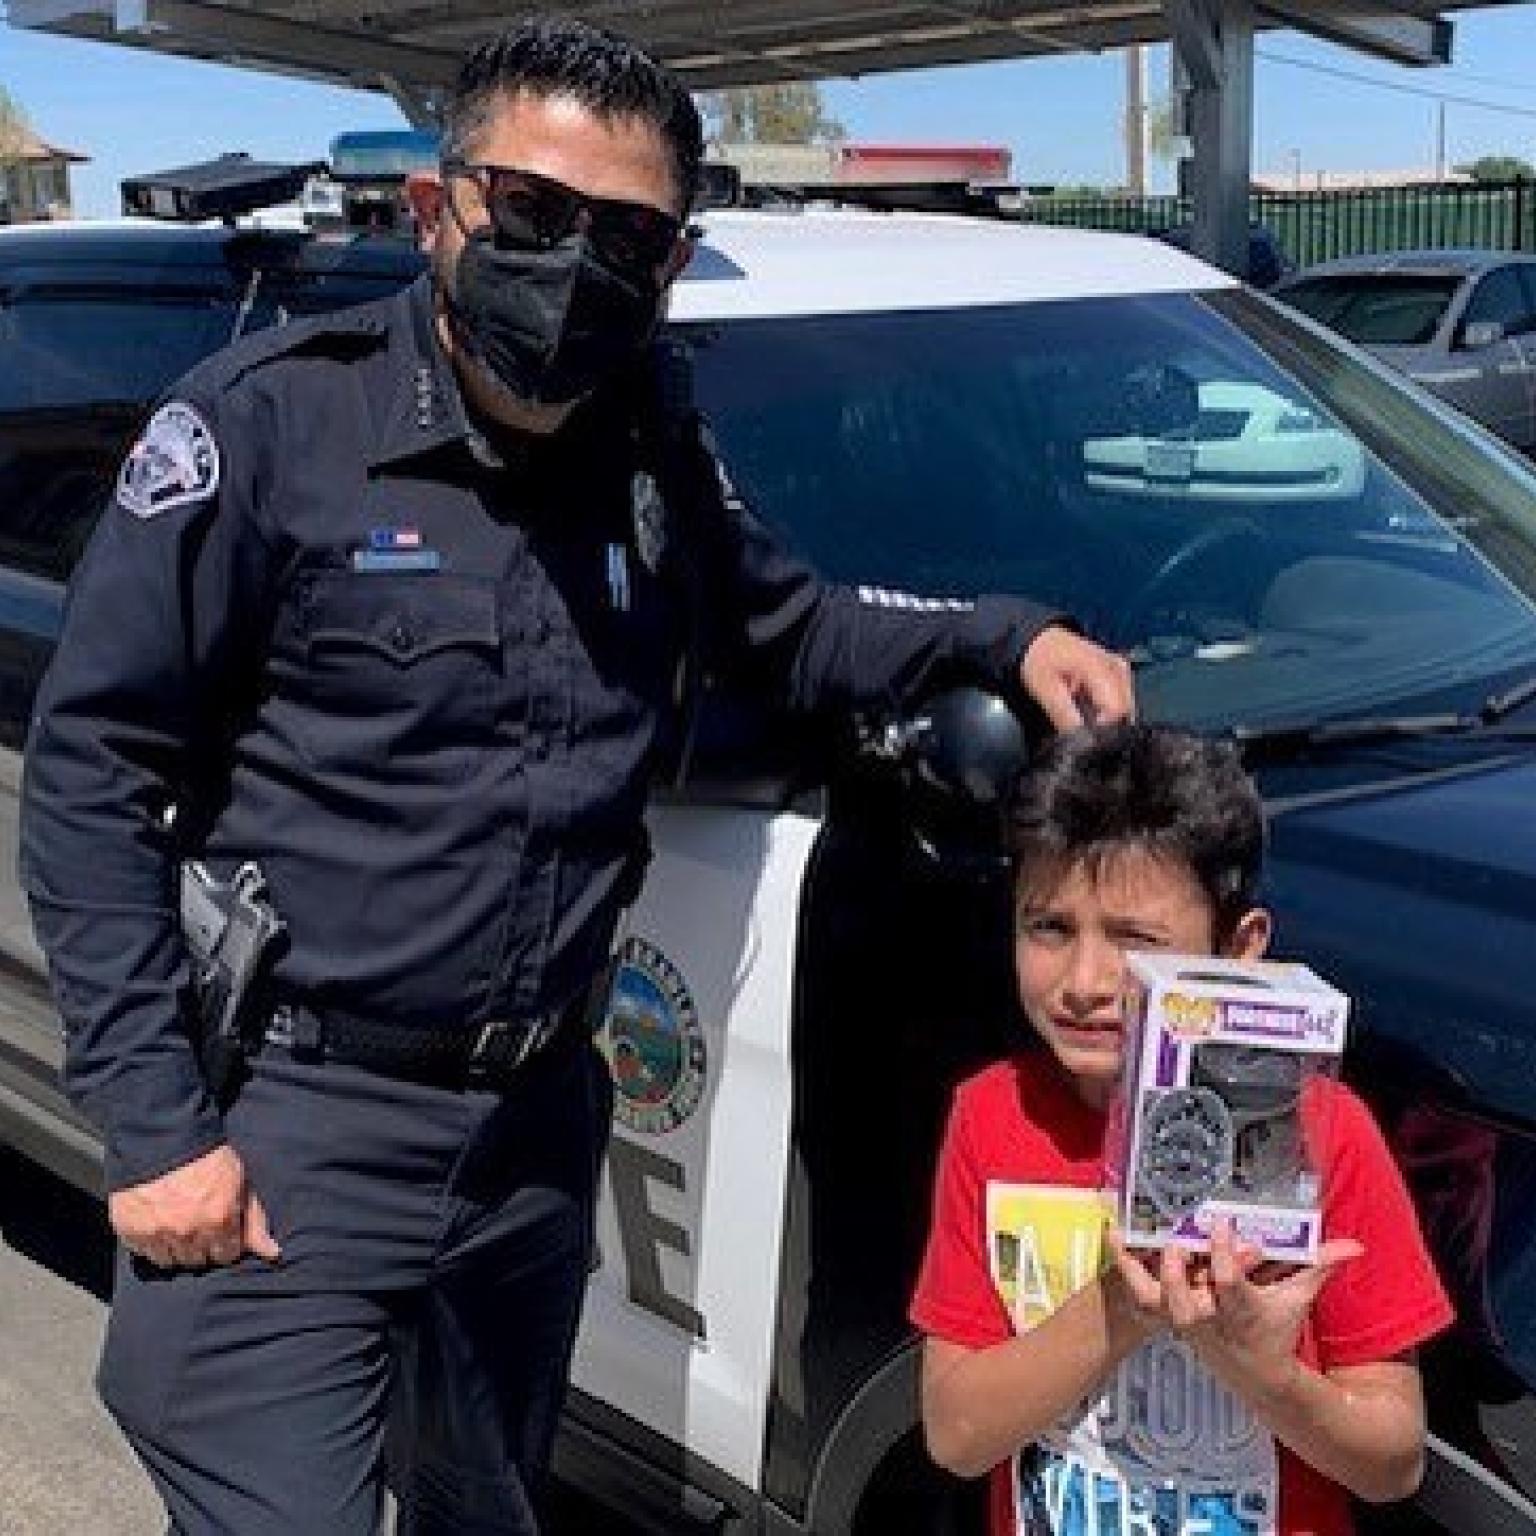 Brawley Police Officer and child holding Funko Police toy